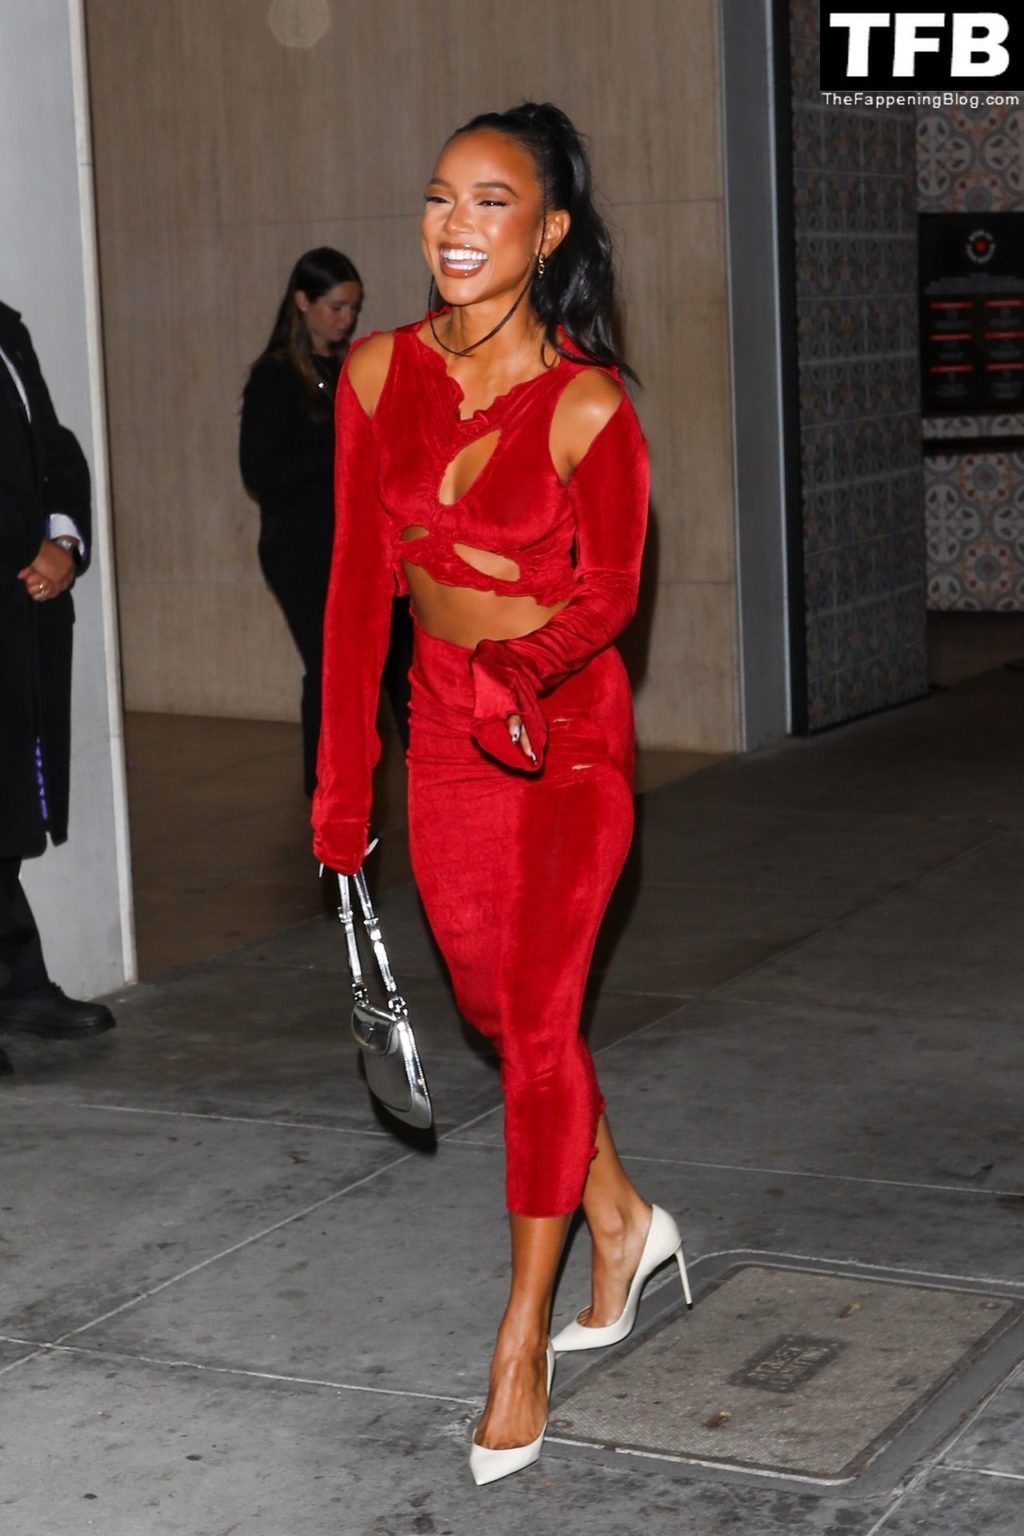 Karrueche Tran Sexy The Fappening Blog 62 1024x1536 - Karrueche Tran Shows Her Pokies in a Red Dress at The Hollywood Reporter’s Oscar Nominees Night (68 Photos)